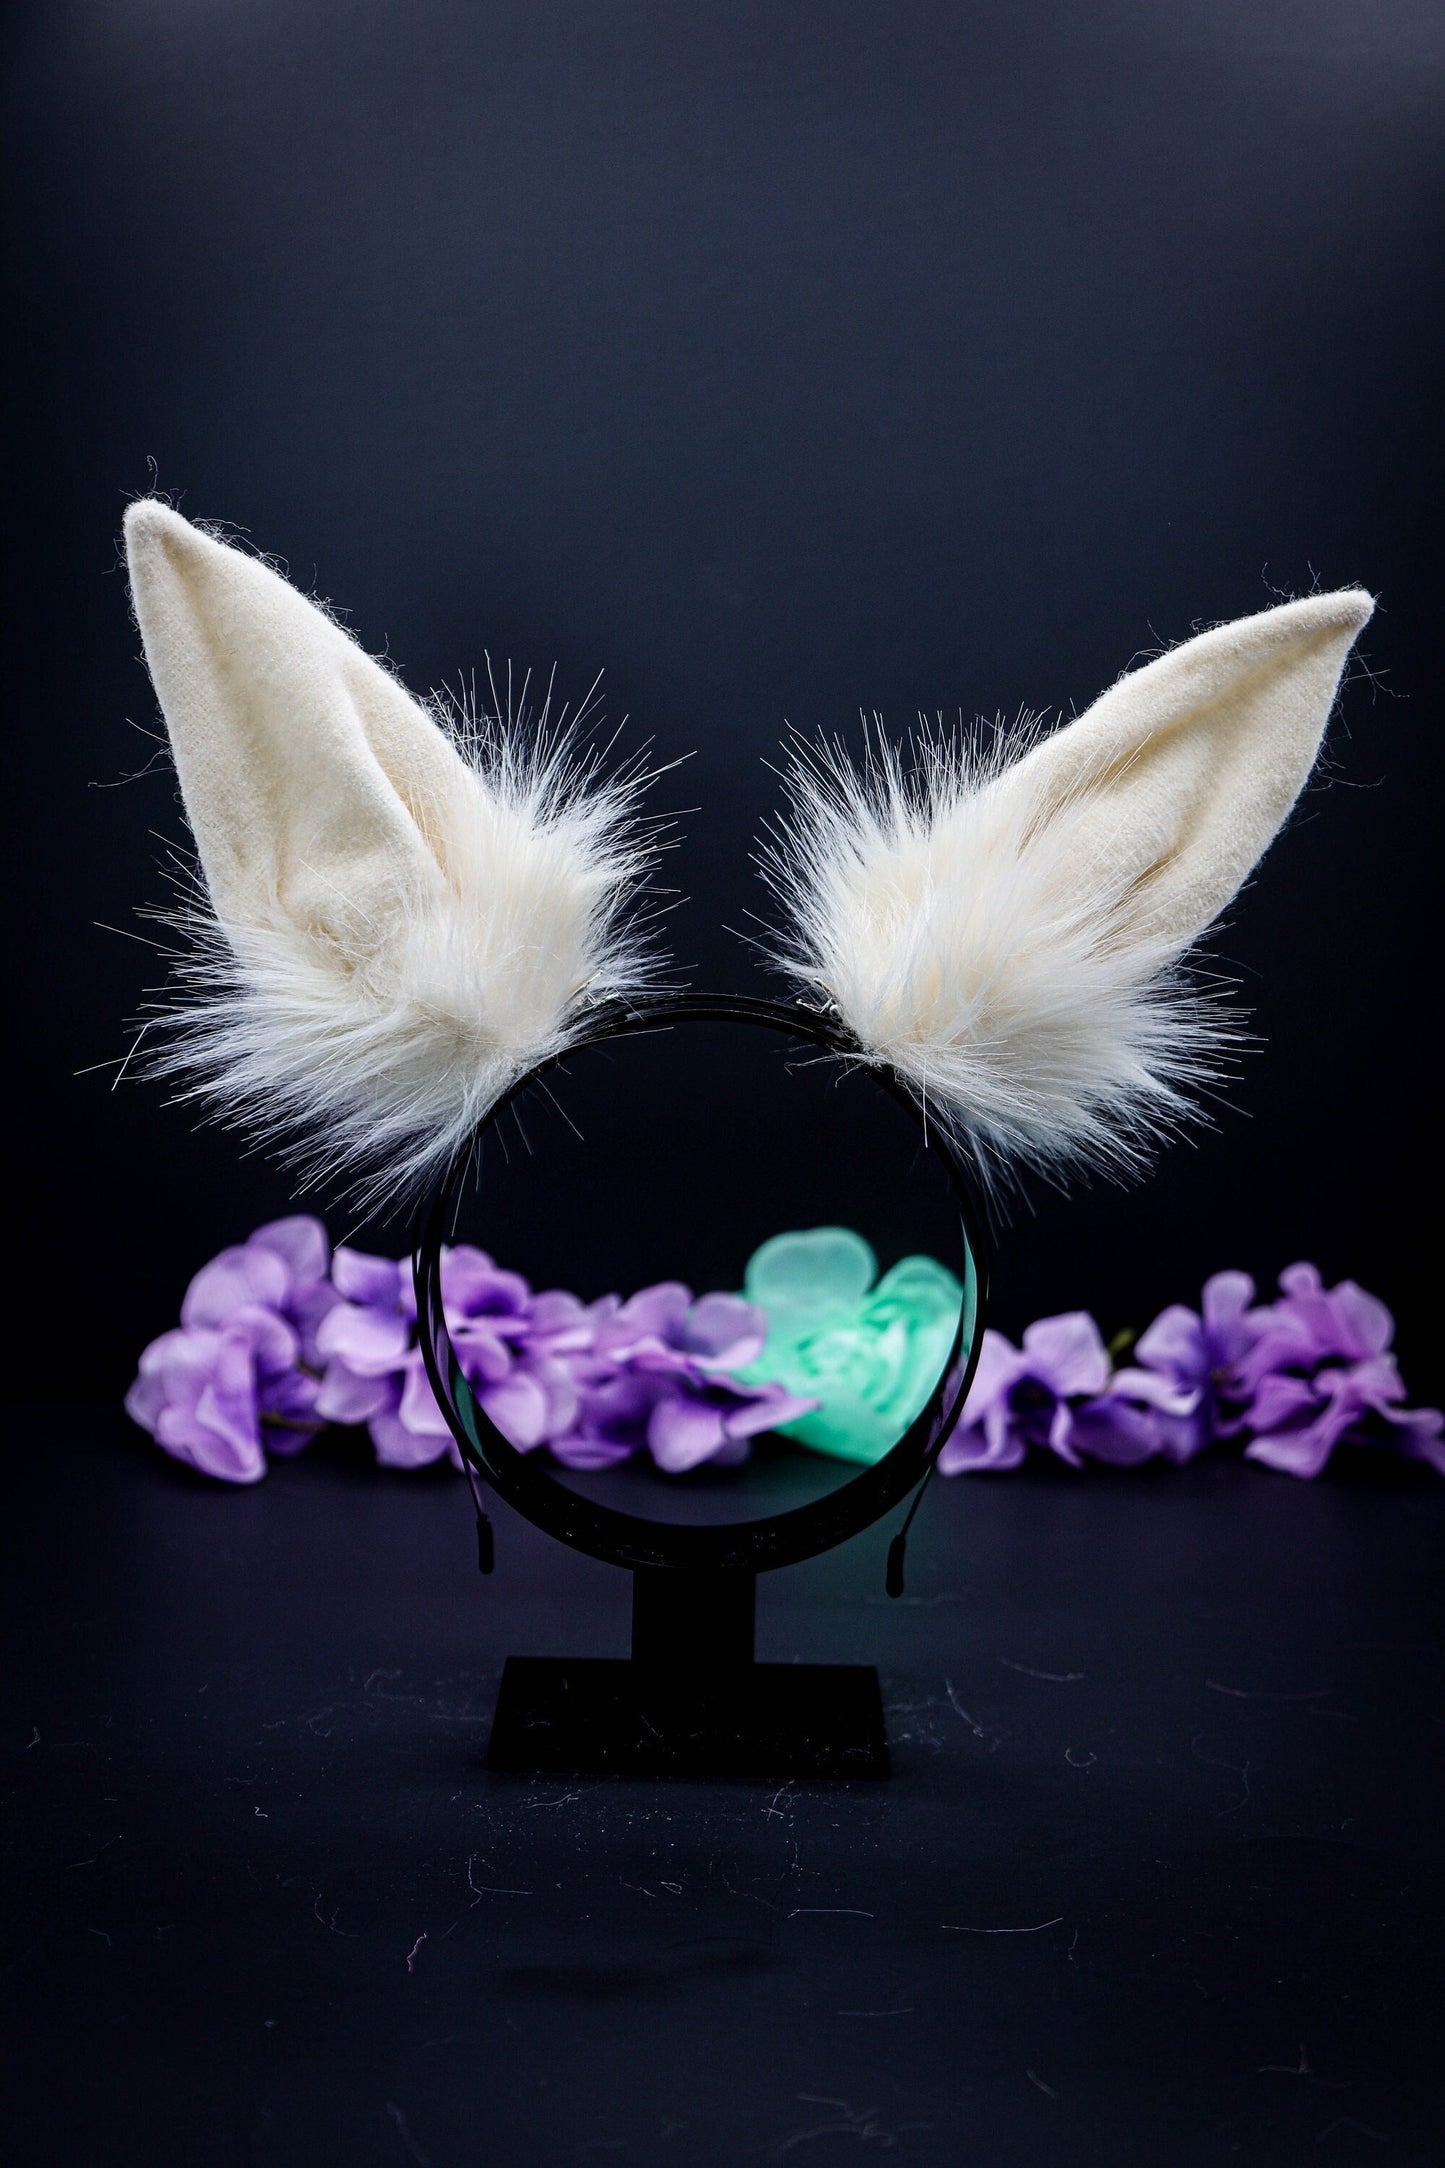 Handmade Bendable Bunny Ears Headband for Pet Play and Animal Roleplay | Cute Cosplay Accessories Gift Ideas-Faux Fur Rabbit Ears